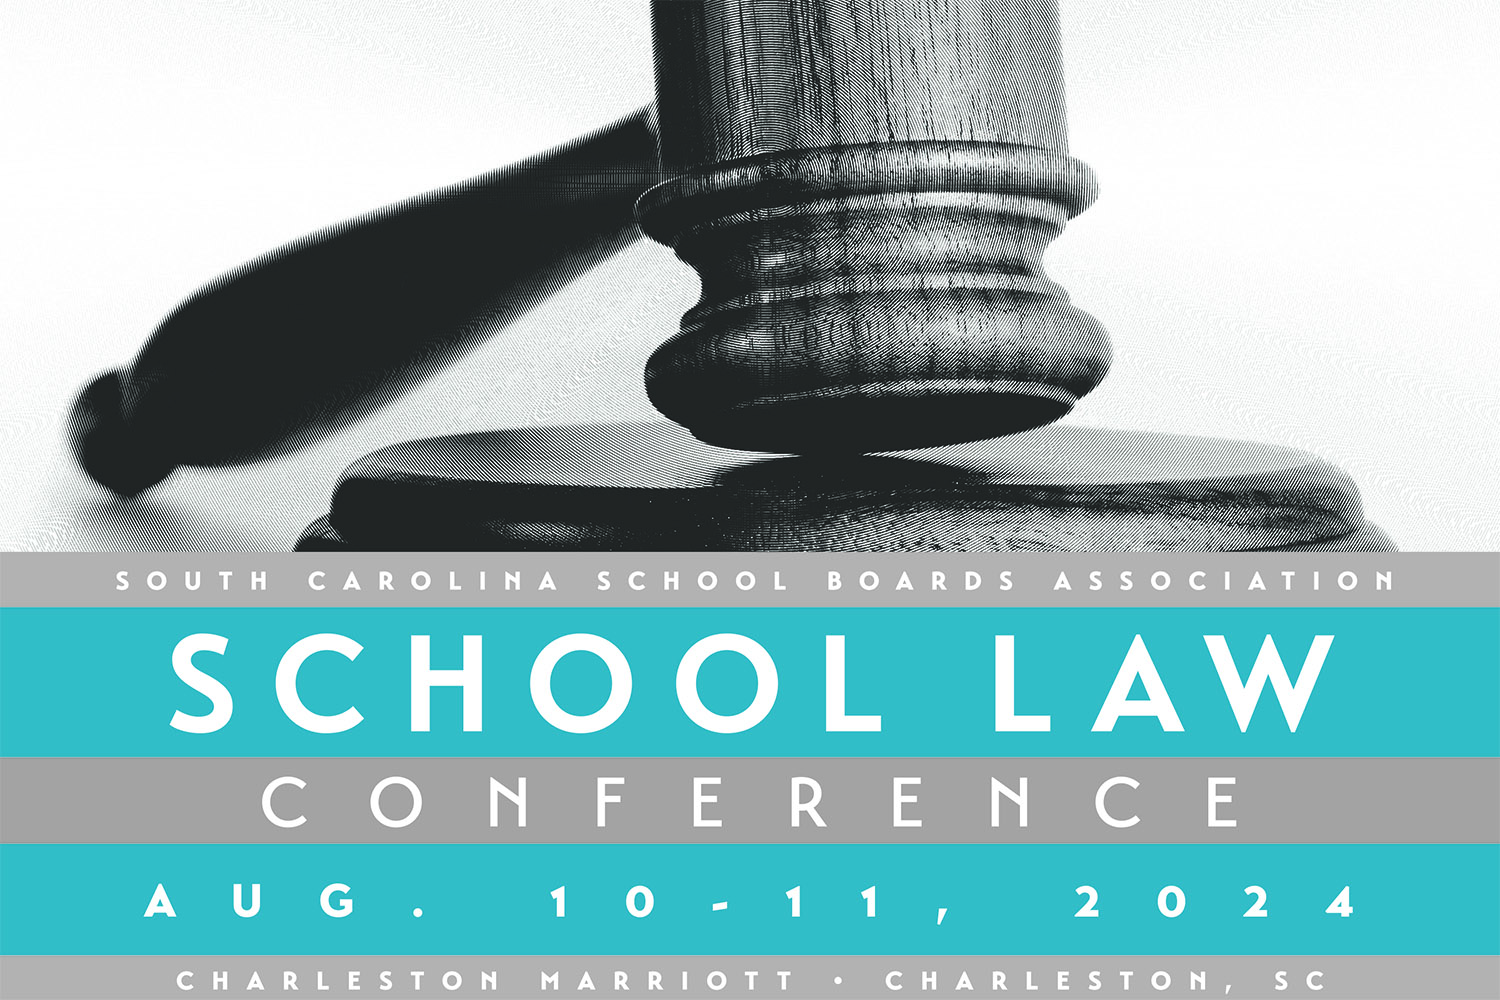 SCHOOL LAW CONFERENCE